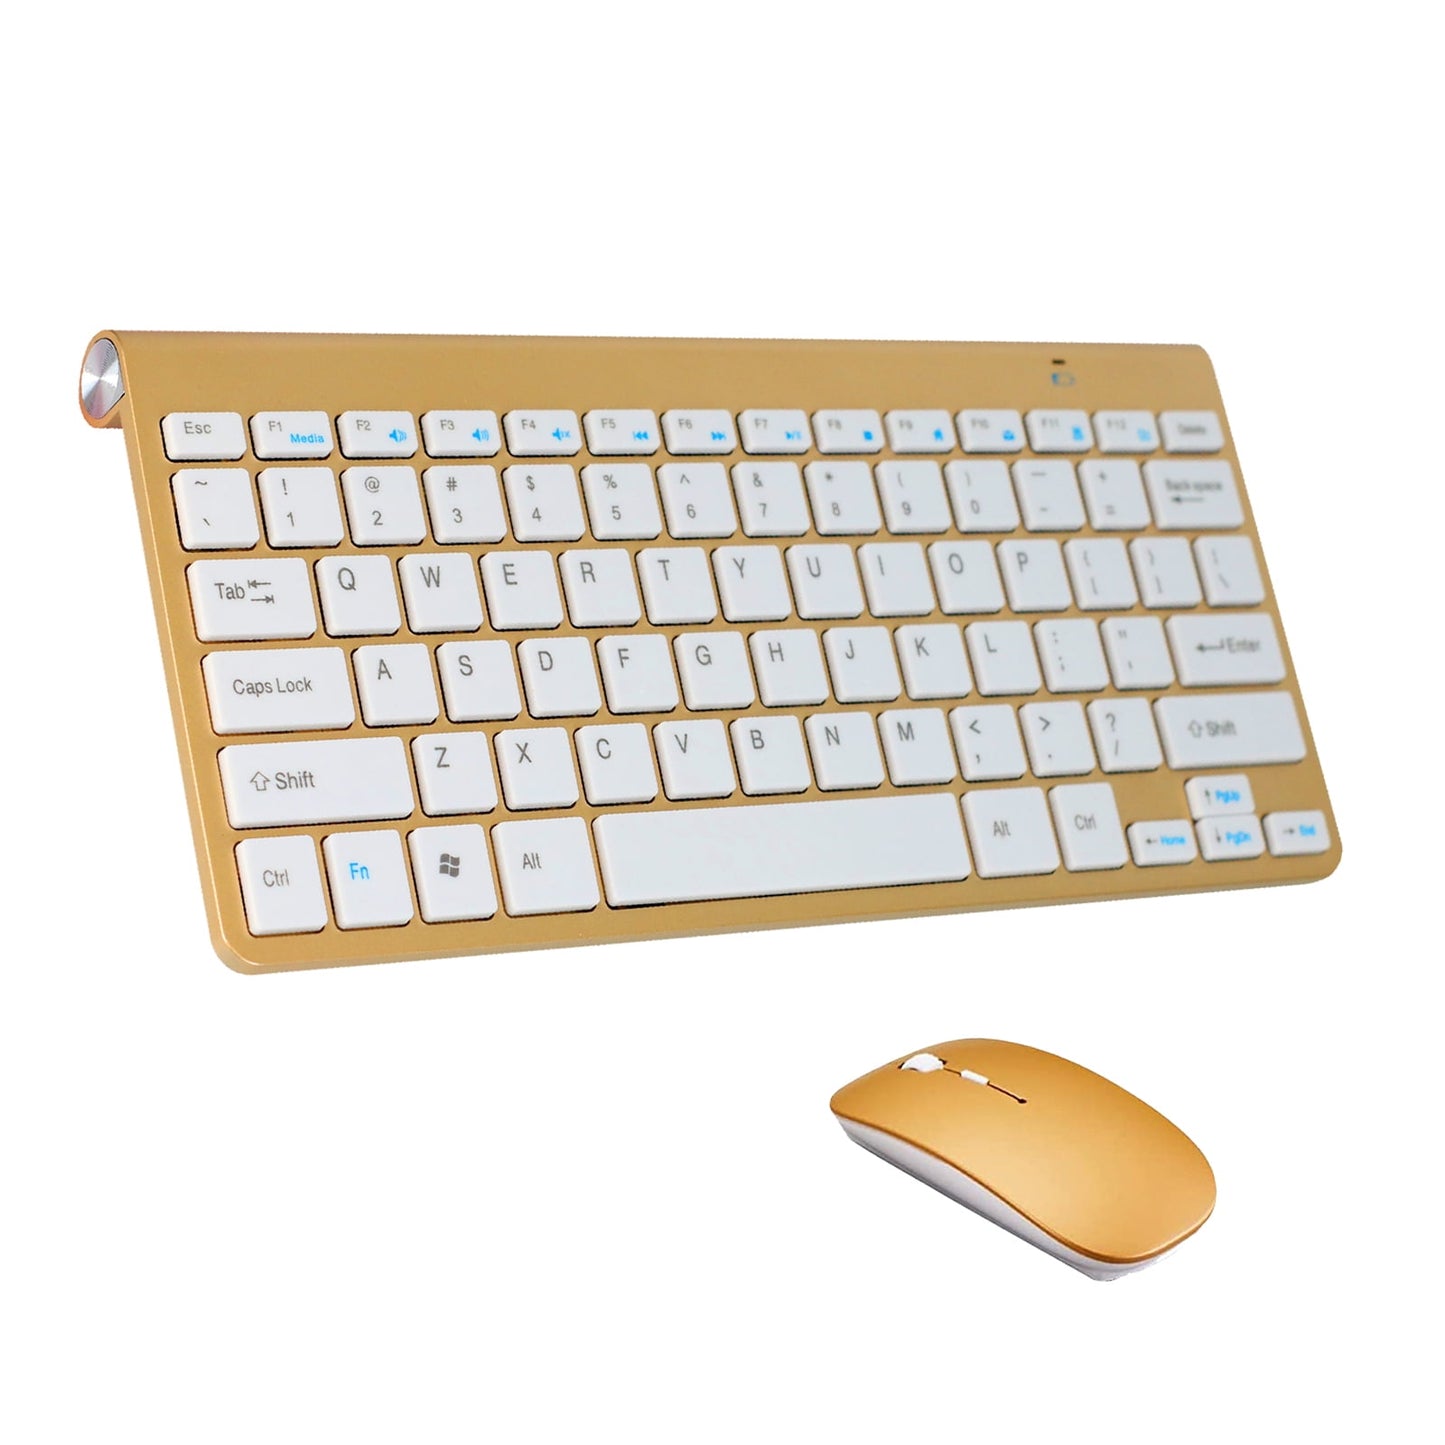 Kepeak Wireless Keyboard and Mouse Combo,Slim Compact Keyboard for Computer,Laptop,Mac